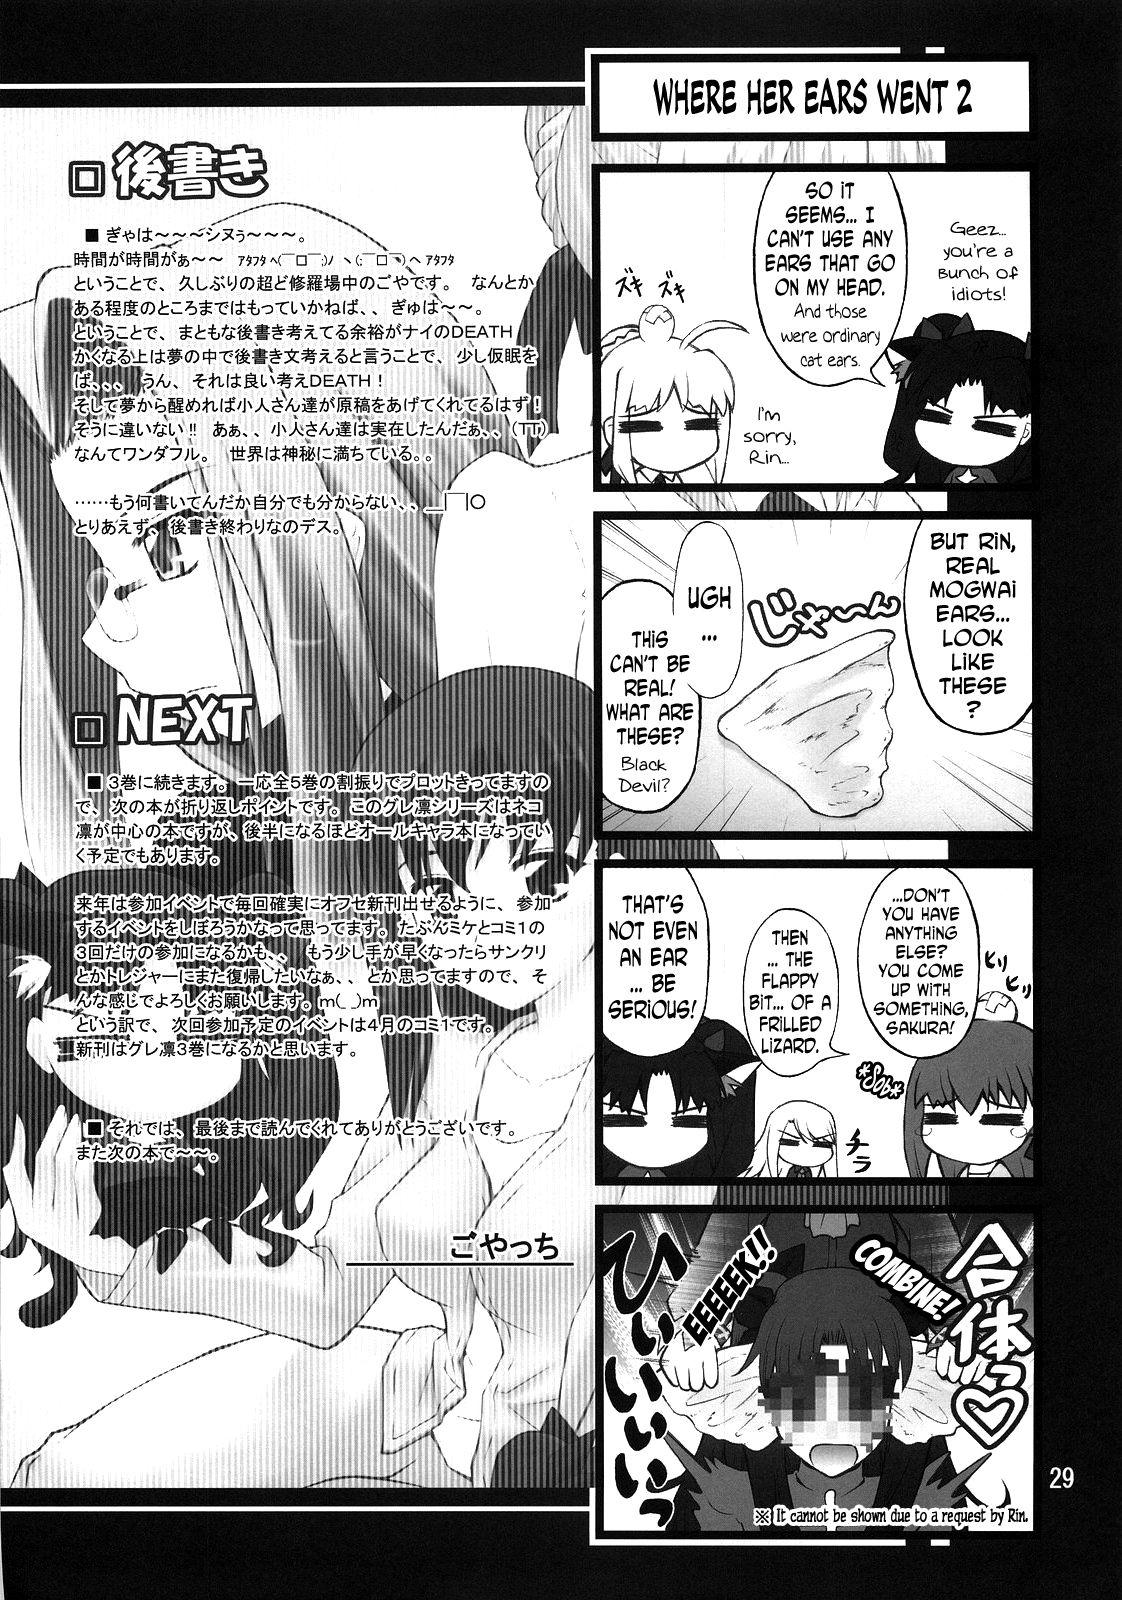 Strap On Grem-Rin 2 - Fate stay night Smalltits - Page 28